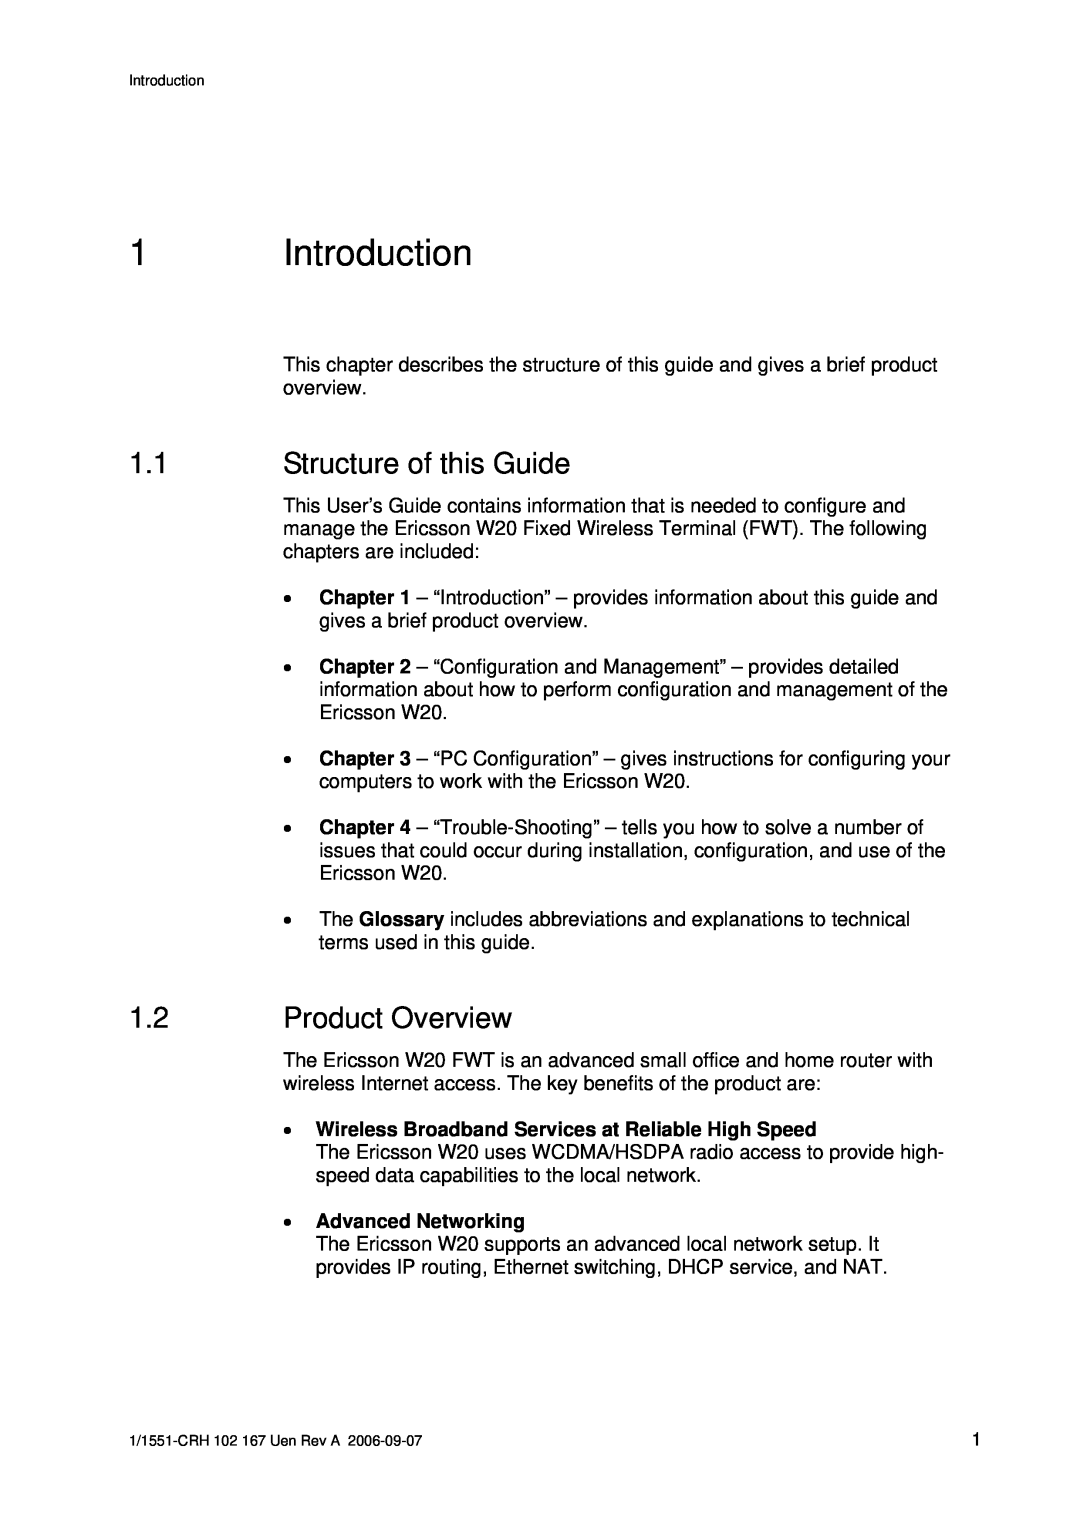 Ericsson W20 manual Introduction, Structure of this Guide, Product Overview 